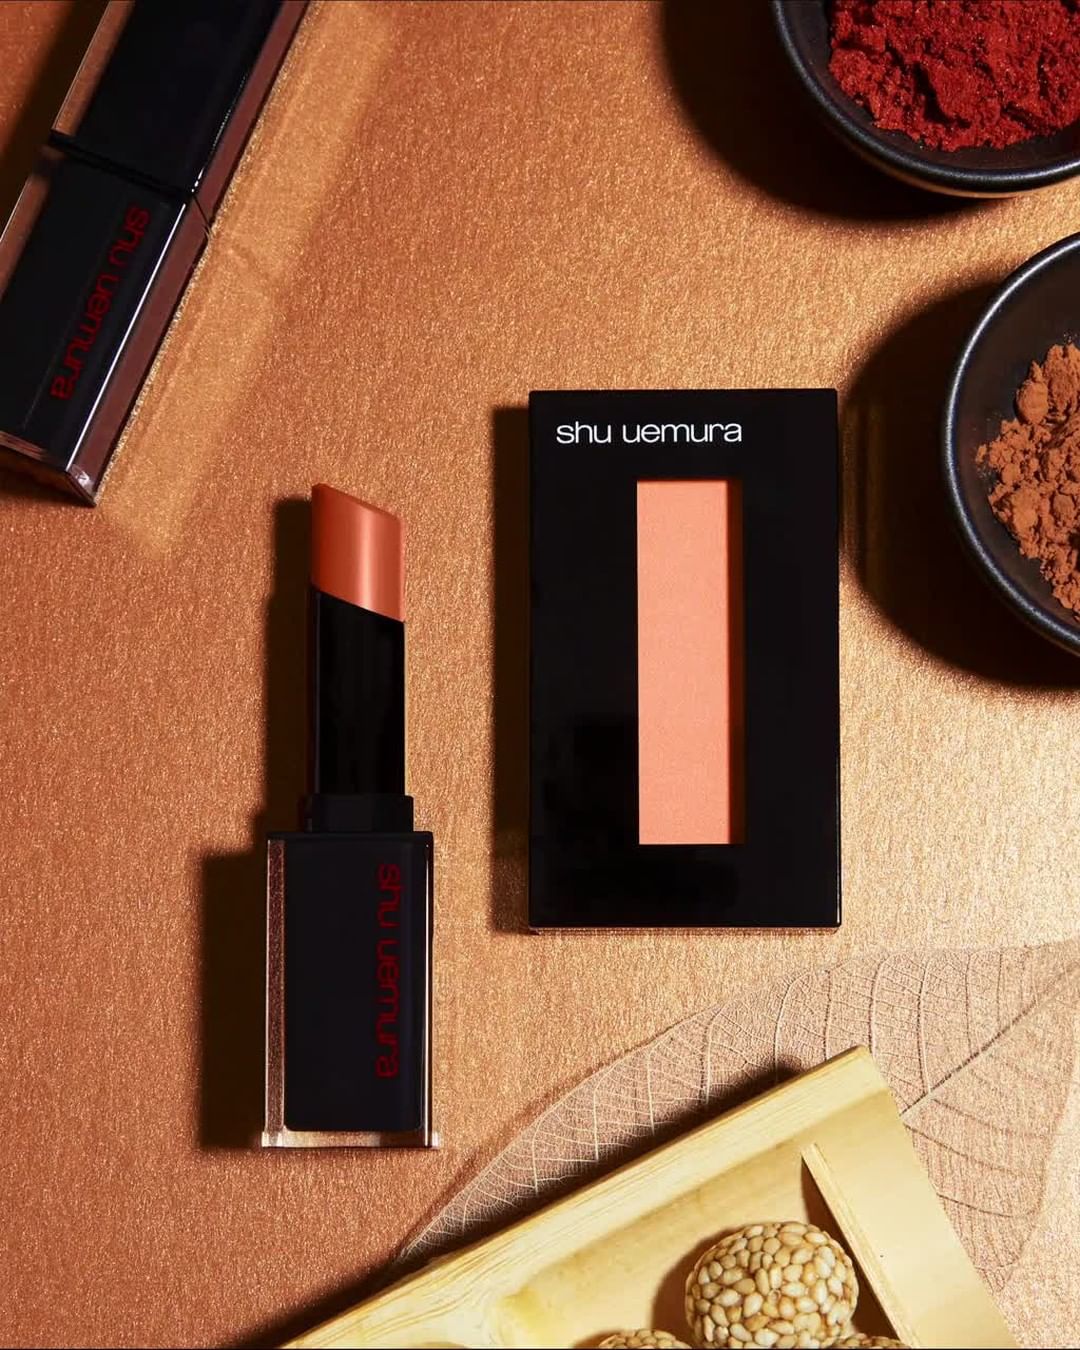 shu uemura - autumn hues and textures to suit every style and mood. 🍁 #shuuemura #shuartistry #rougeunlimited⁠